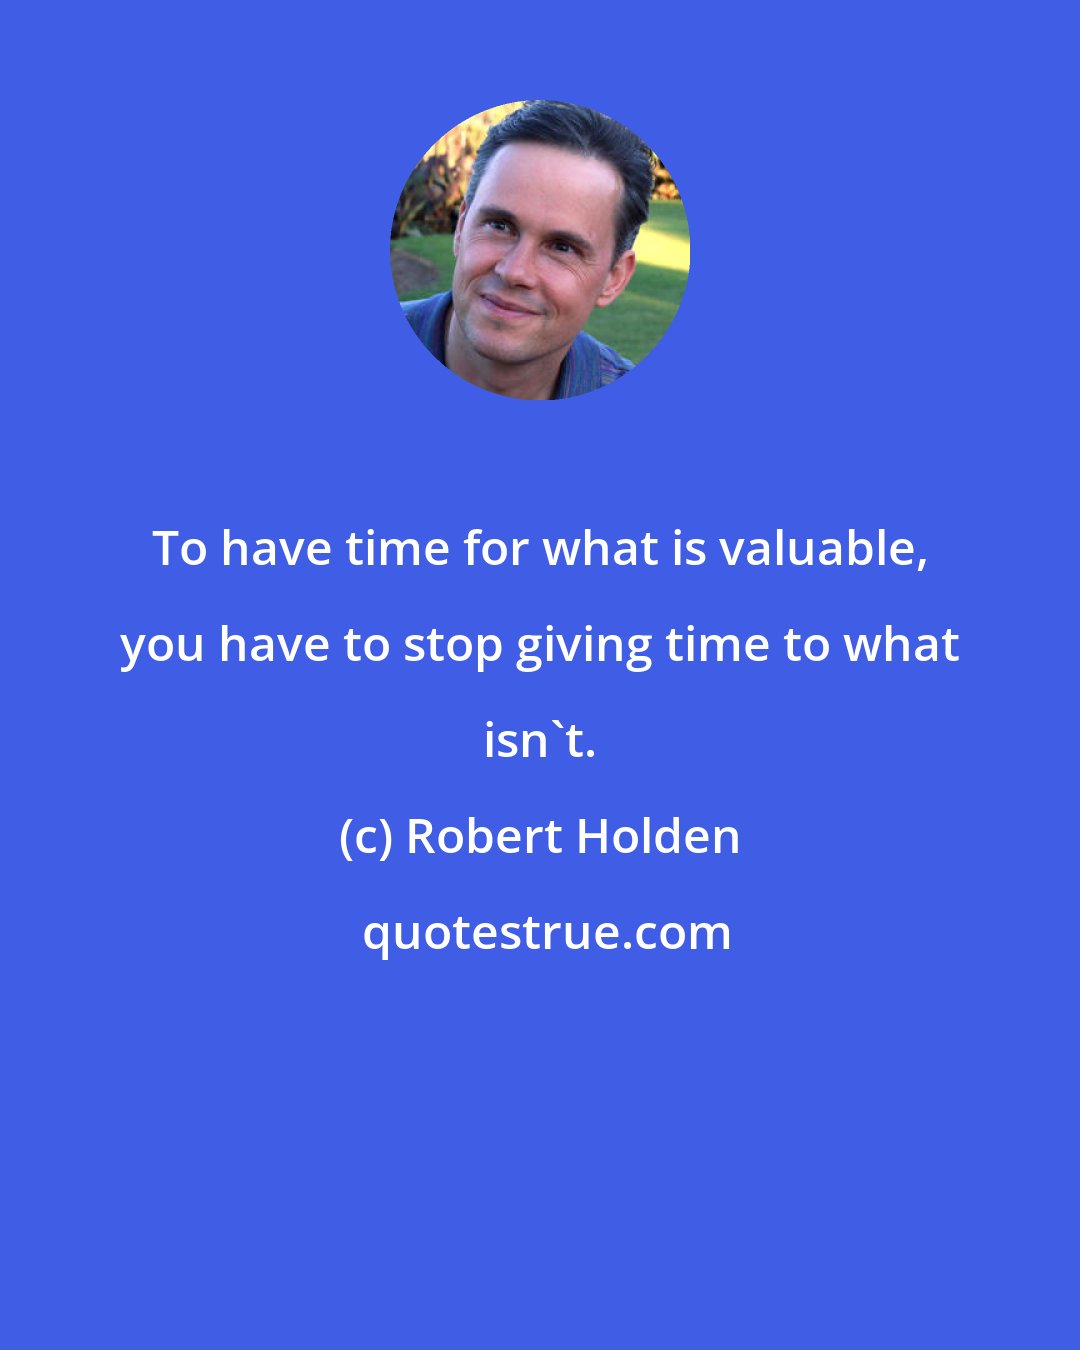 Robert Holden: To have time for what is valuable, you have to stop giving time to what isn't.